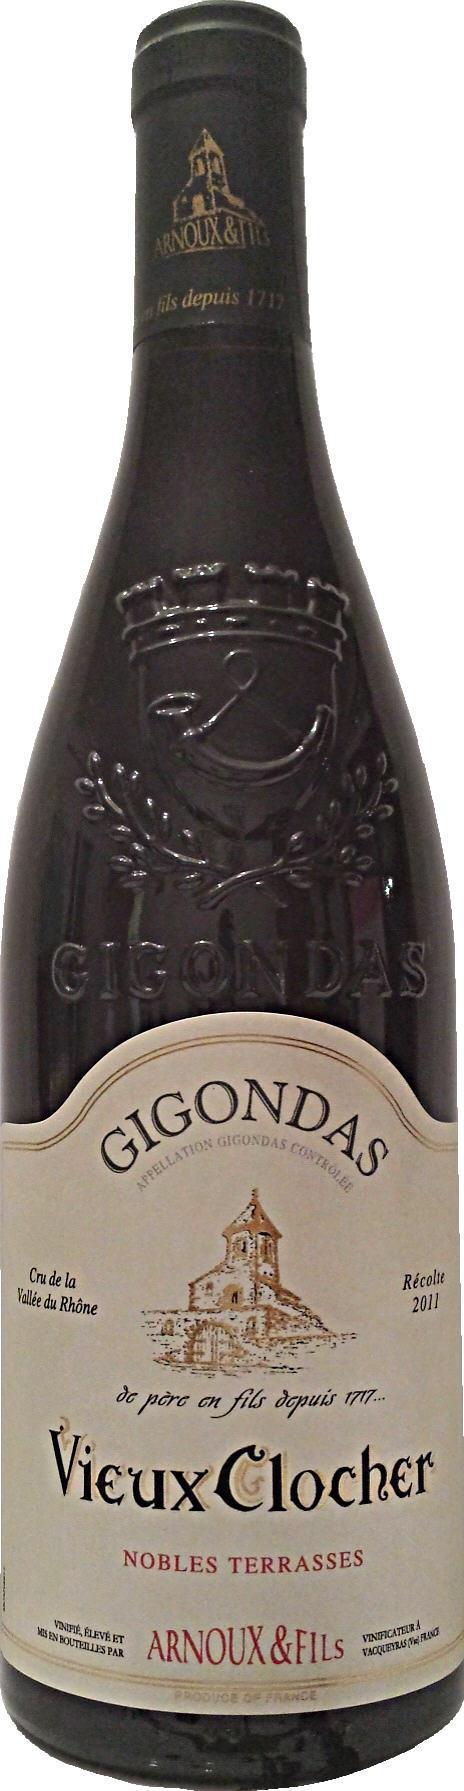 Gigondas Vieux Clocher Red Vintage 2016 Red : 90-92/100 The 2016 Gigondas Vieux Clocher is a firmly tannic wine that likely to require some patience.